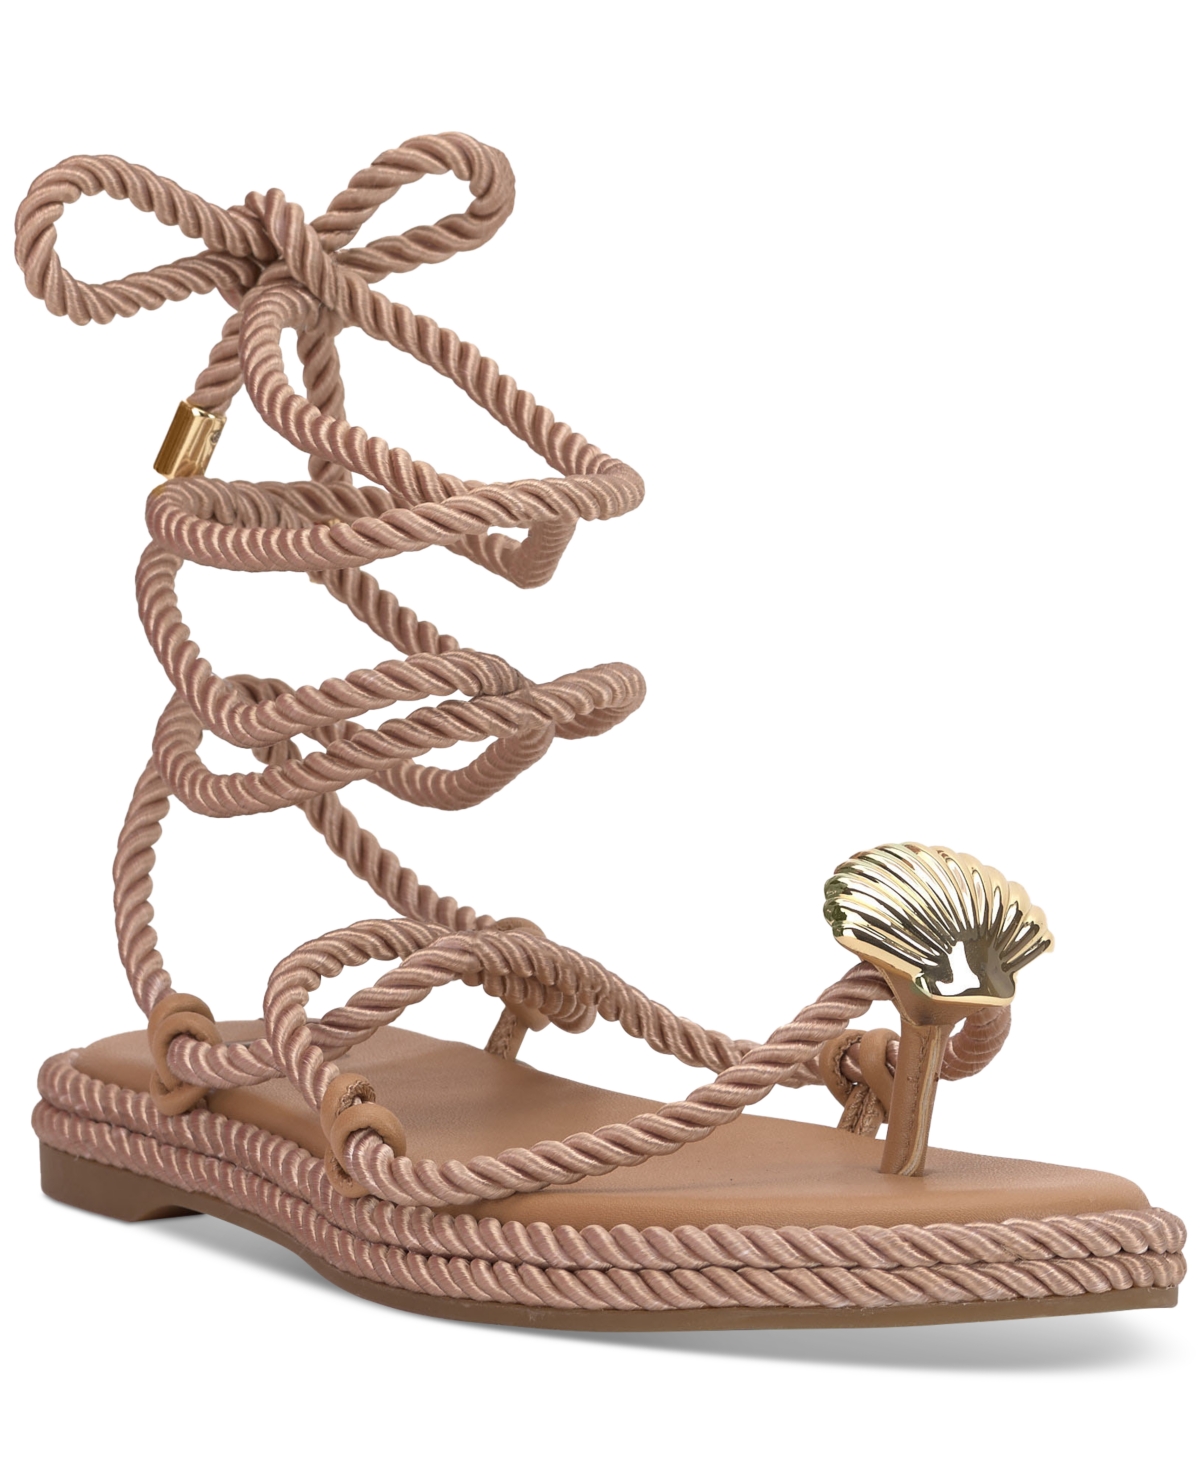 Women's Mabry Lace-Up Flat Sandals, Created for Macy's - Natural Rope